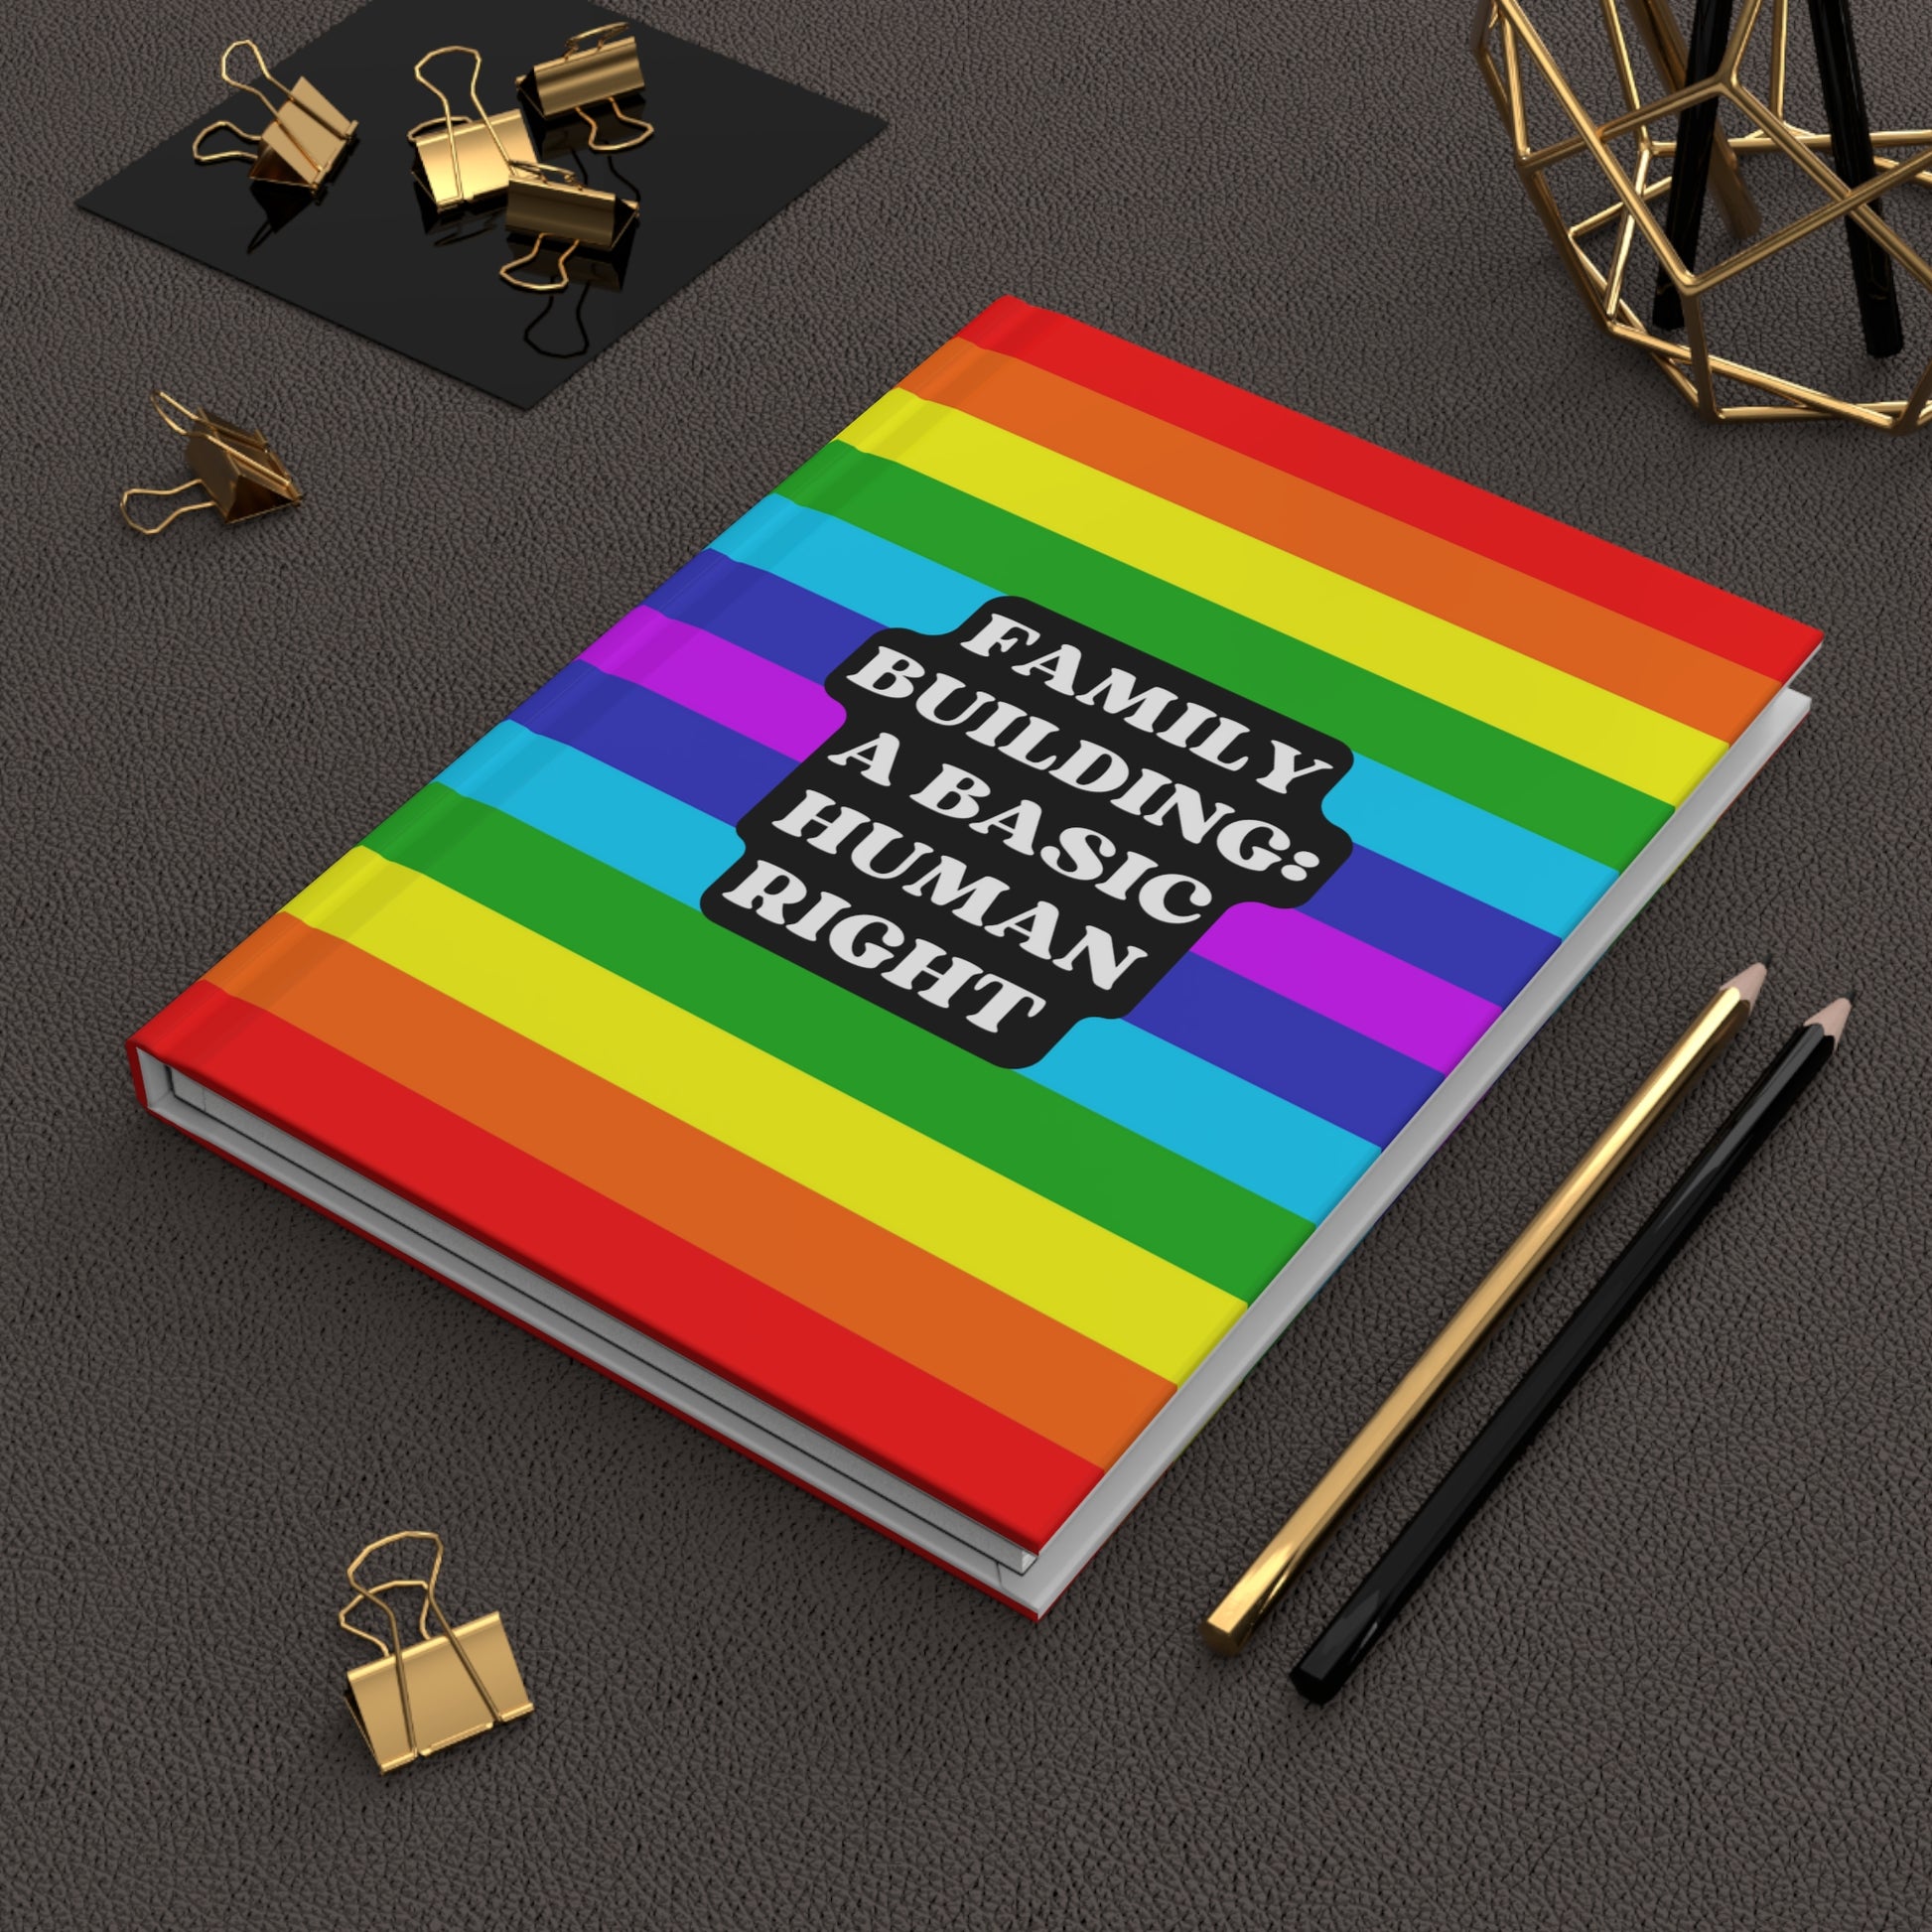 Family Building: A Basic Human Right Hardcover Notebook In Context